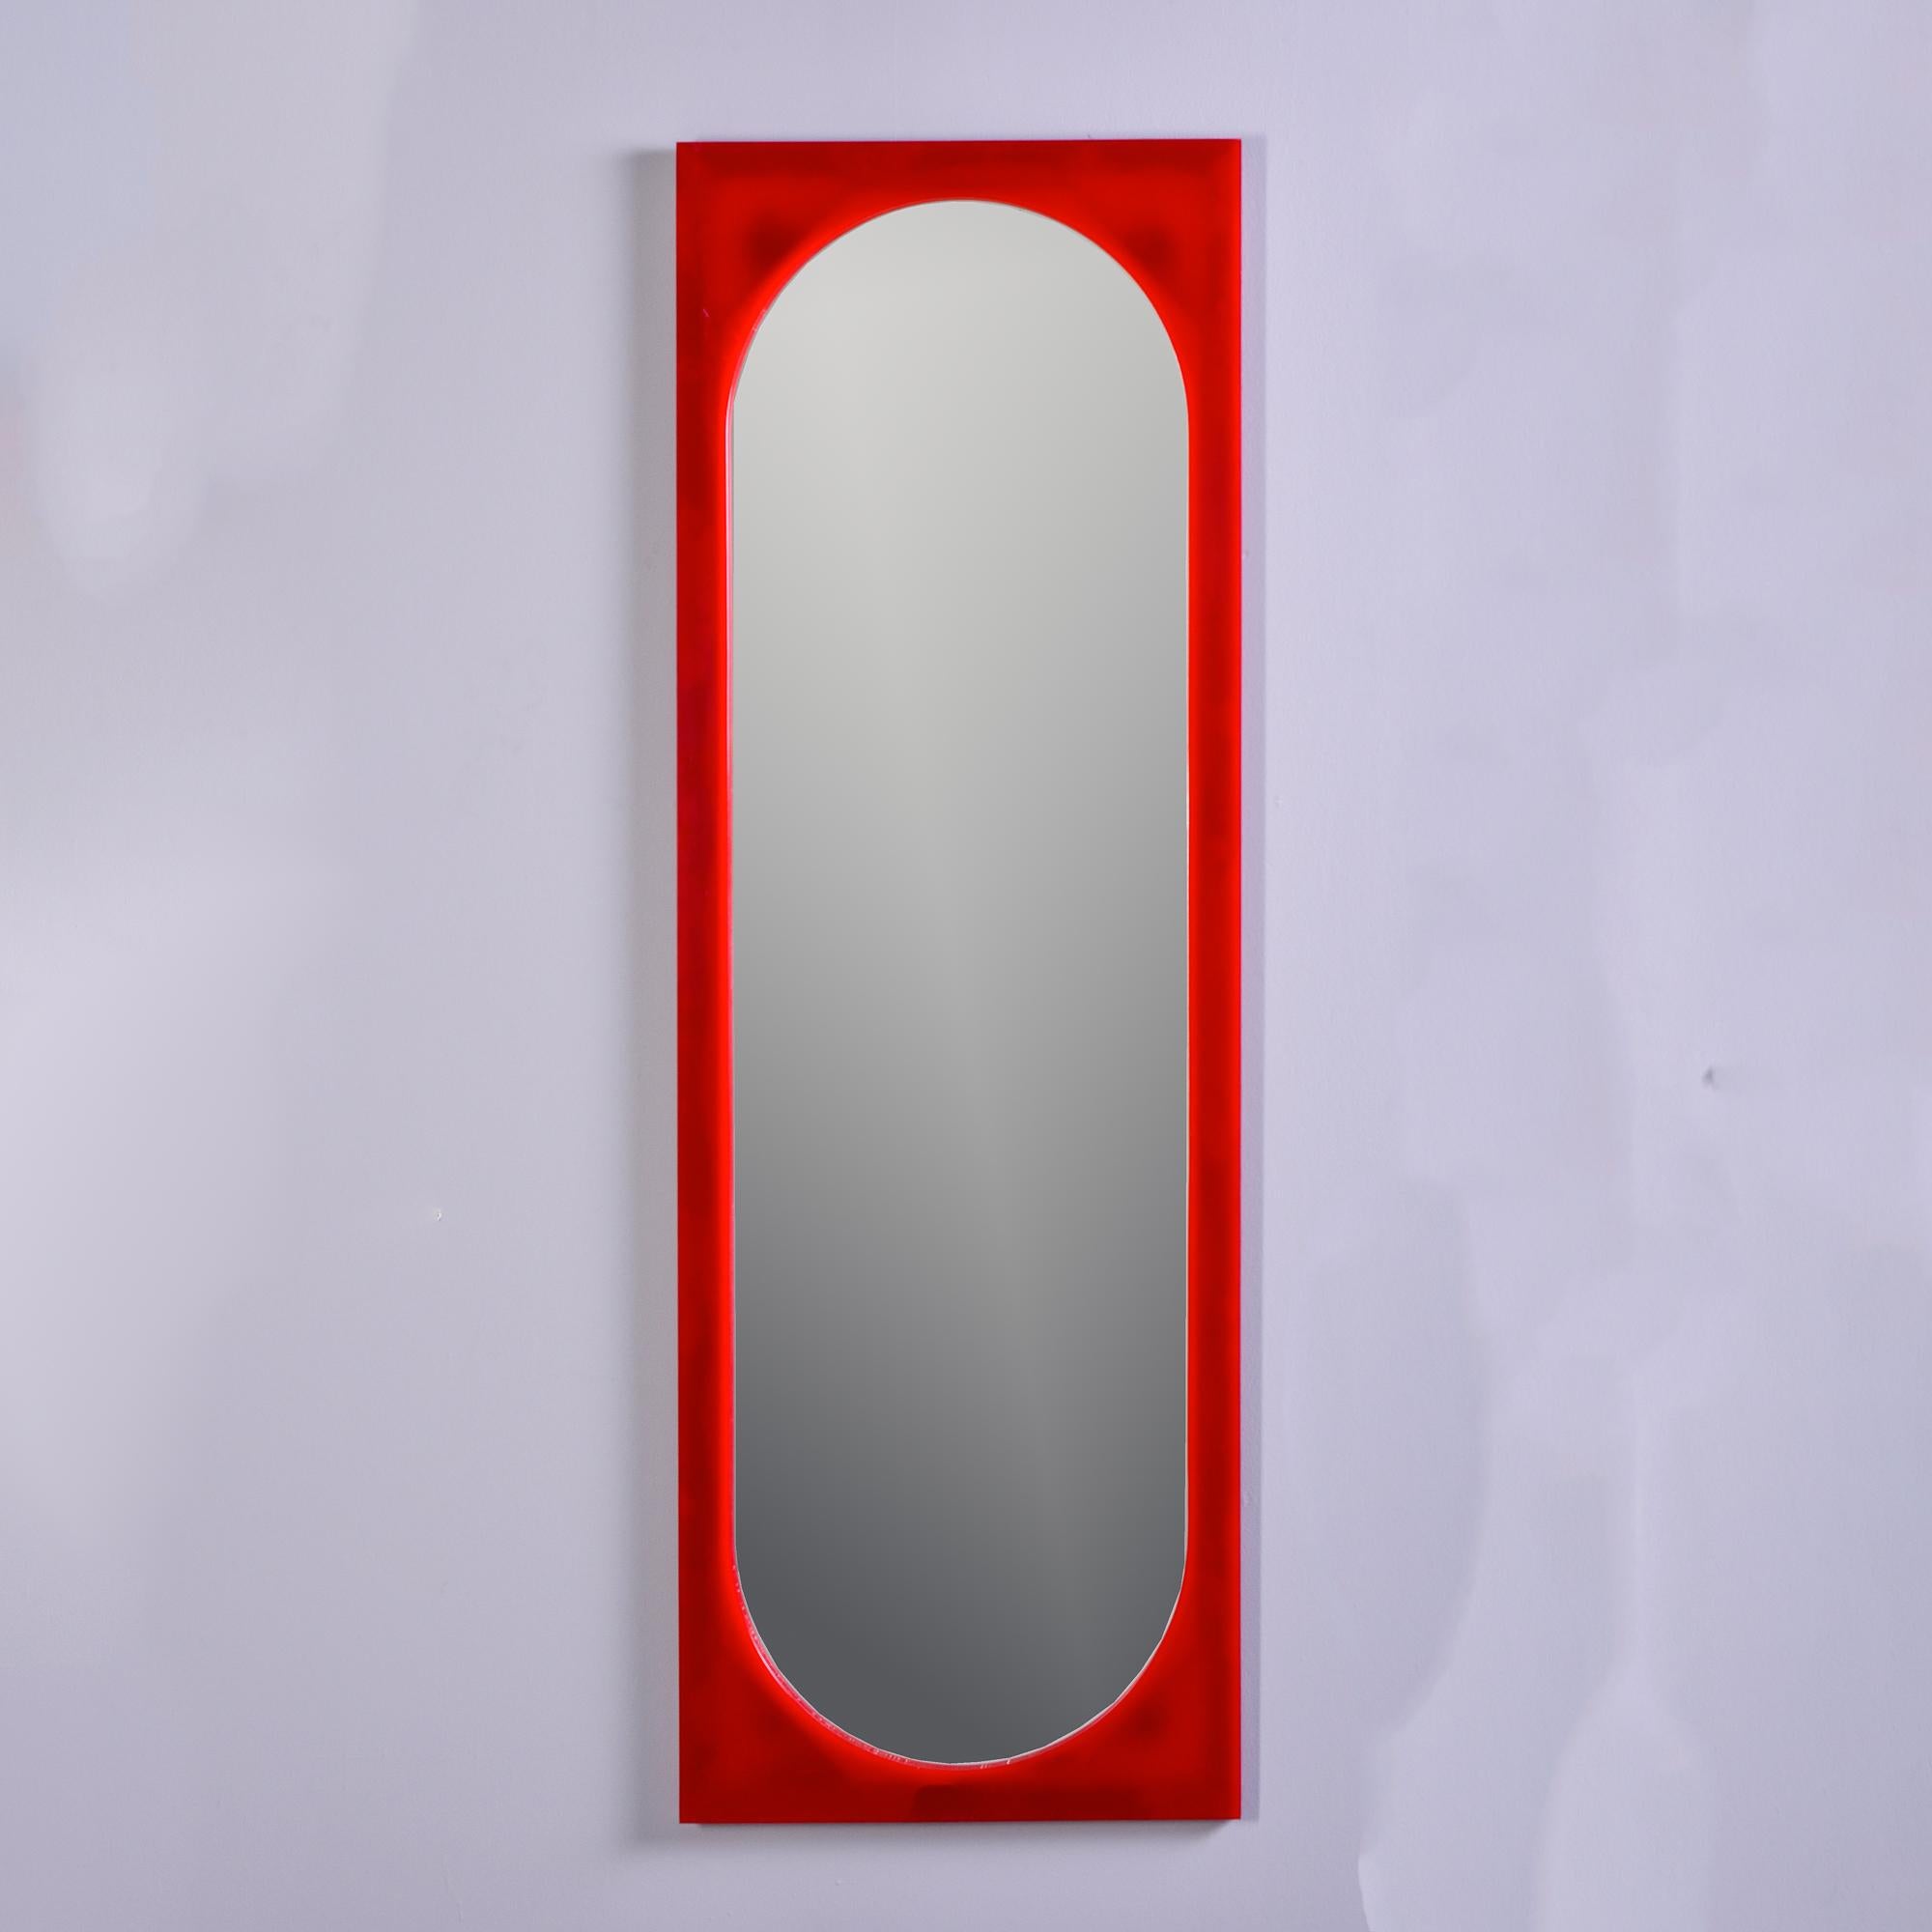 Found in Italy, this circa 1980s tall, slender rectangular mirror is attributed to designer Anna Castelli for Kartell and features a true red plastic frame with an oval cut out for the mirror. Very good vintage condition with only minor scattered